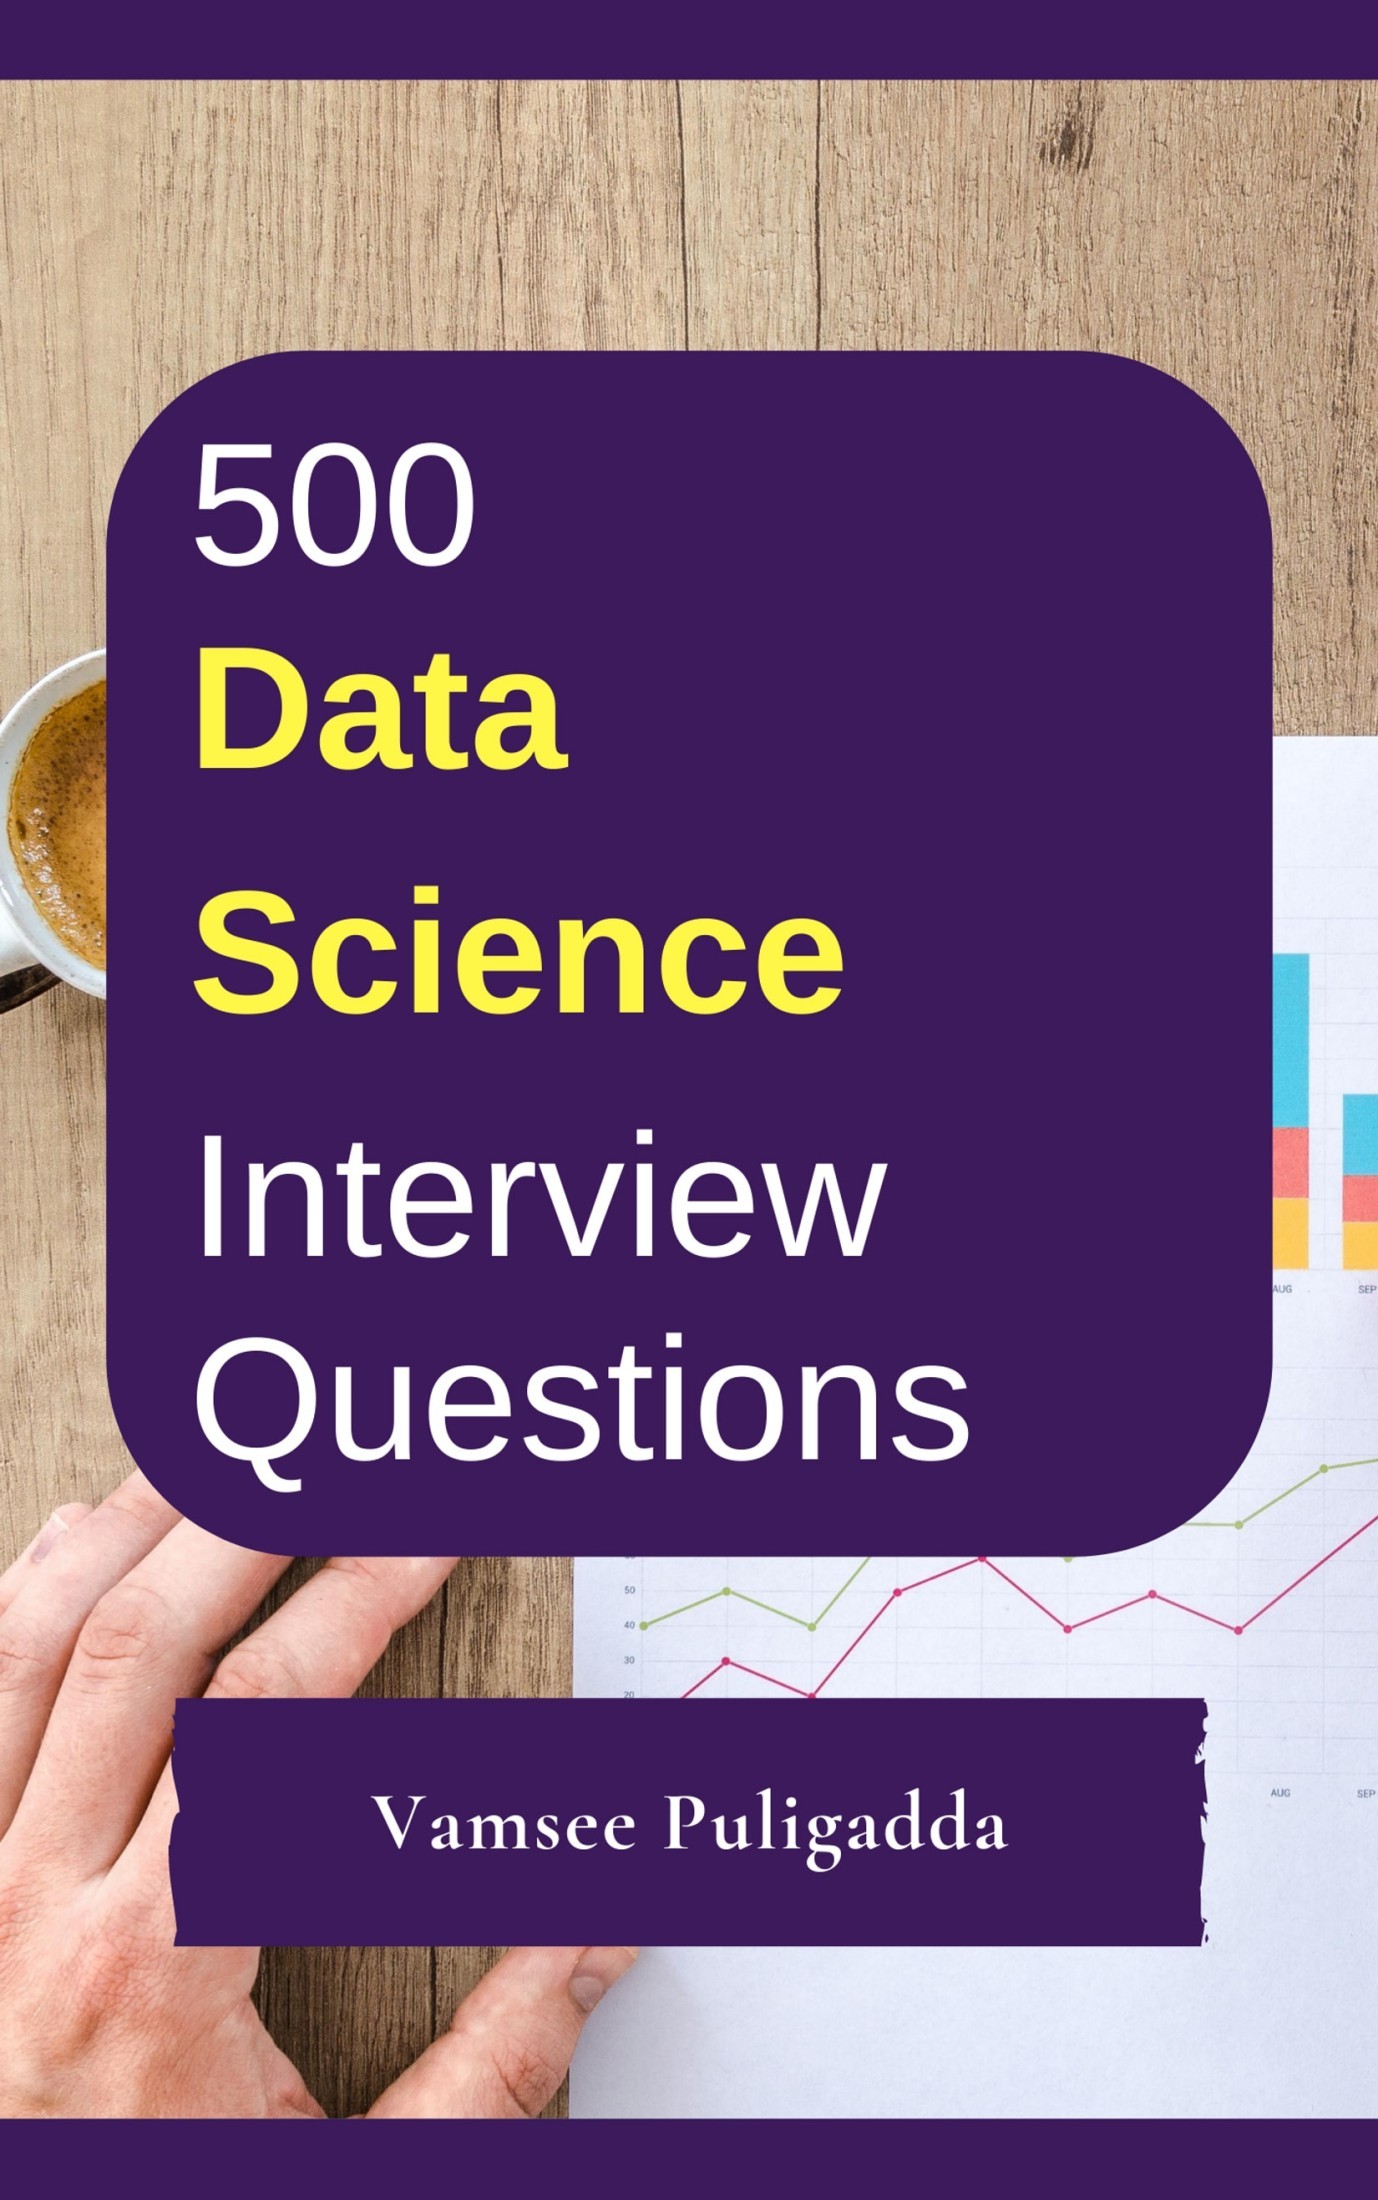 500 Data Science Interview Questions and Answers